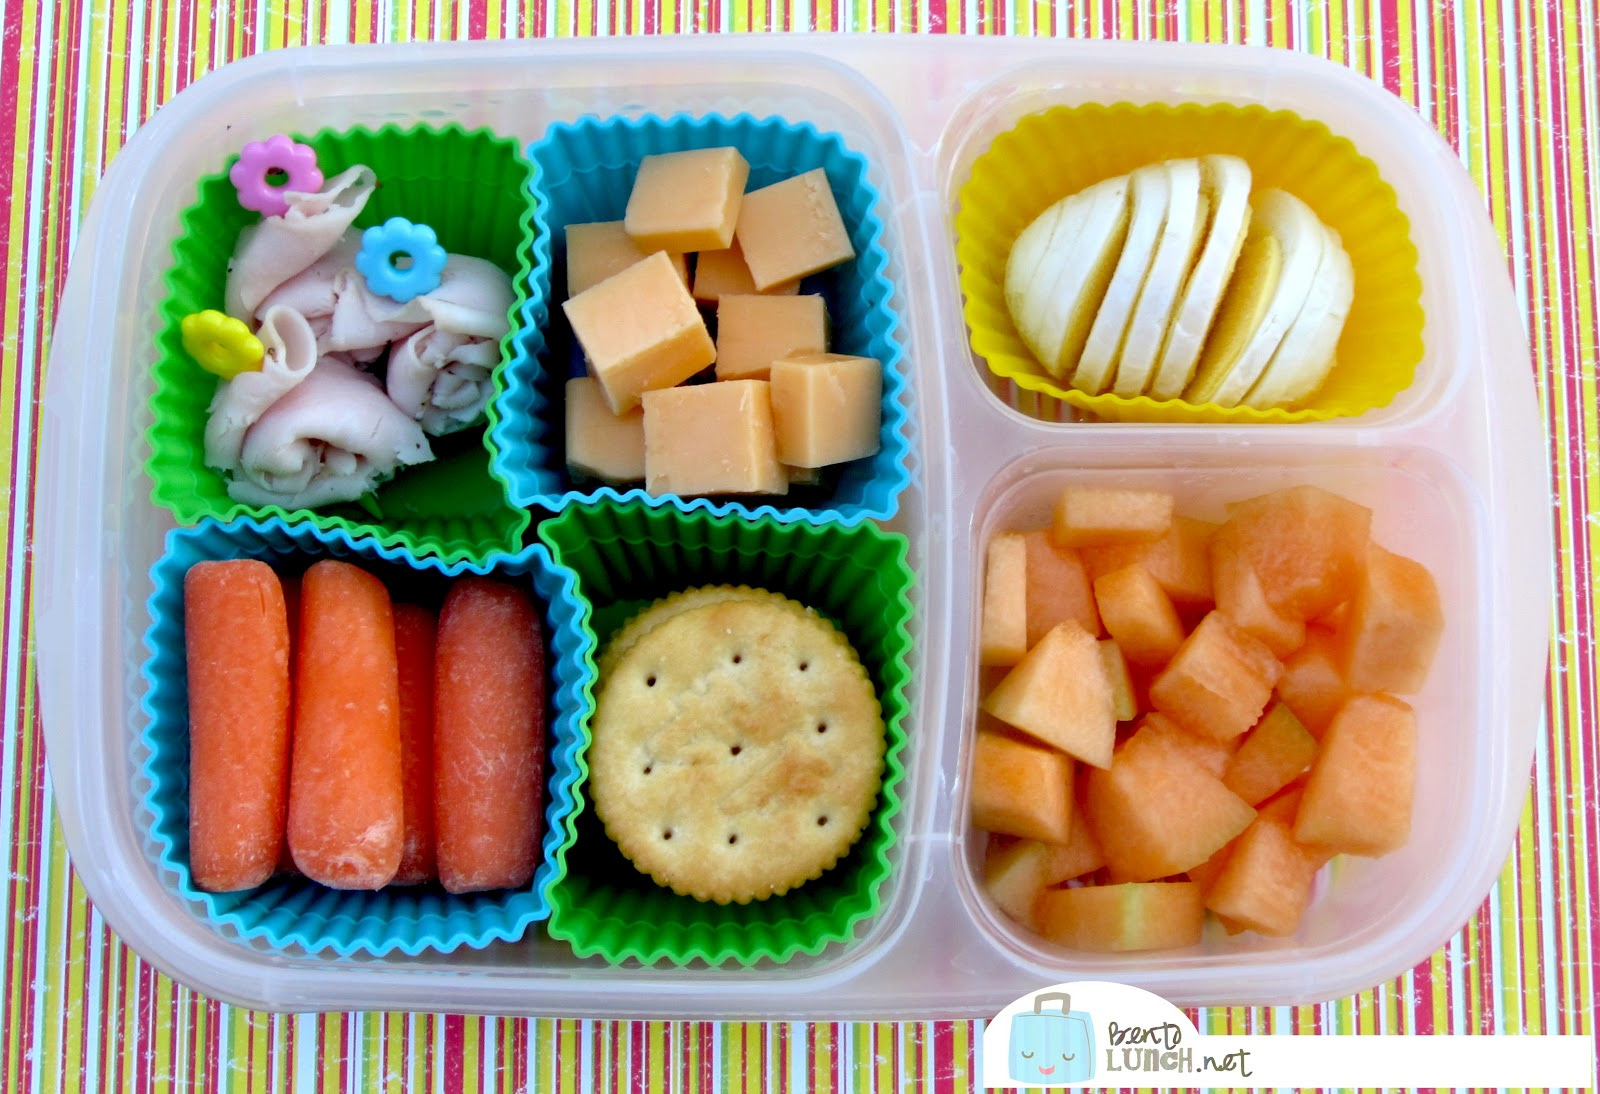 Delicious Homemade Lunchables - Perfect for On-the-go!